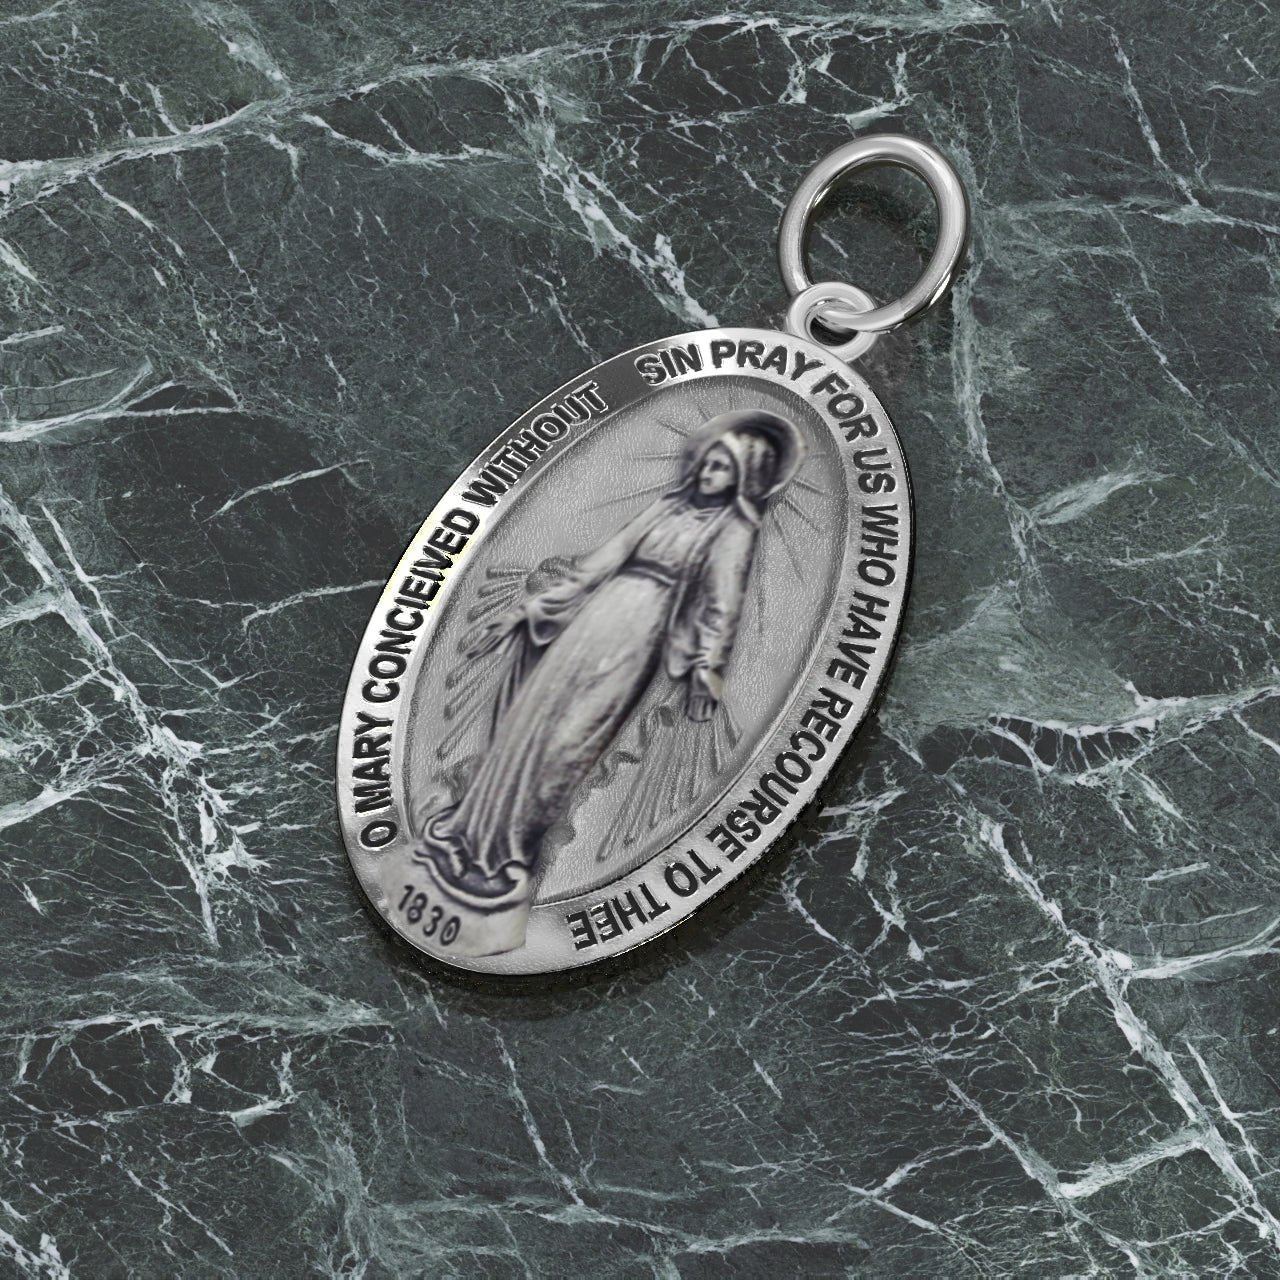 Small Ladies 925 Sterling Silver Oval Miraculous Virgin Mary Antique Finish Pendant Necklace, 21mm - US Jewels